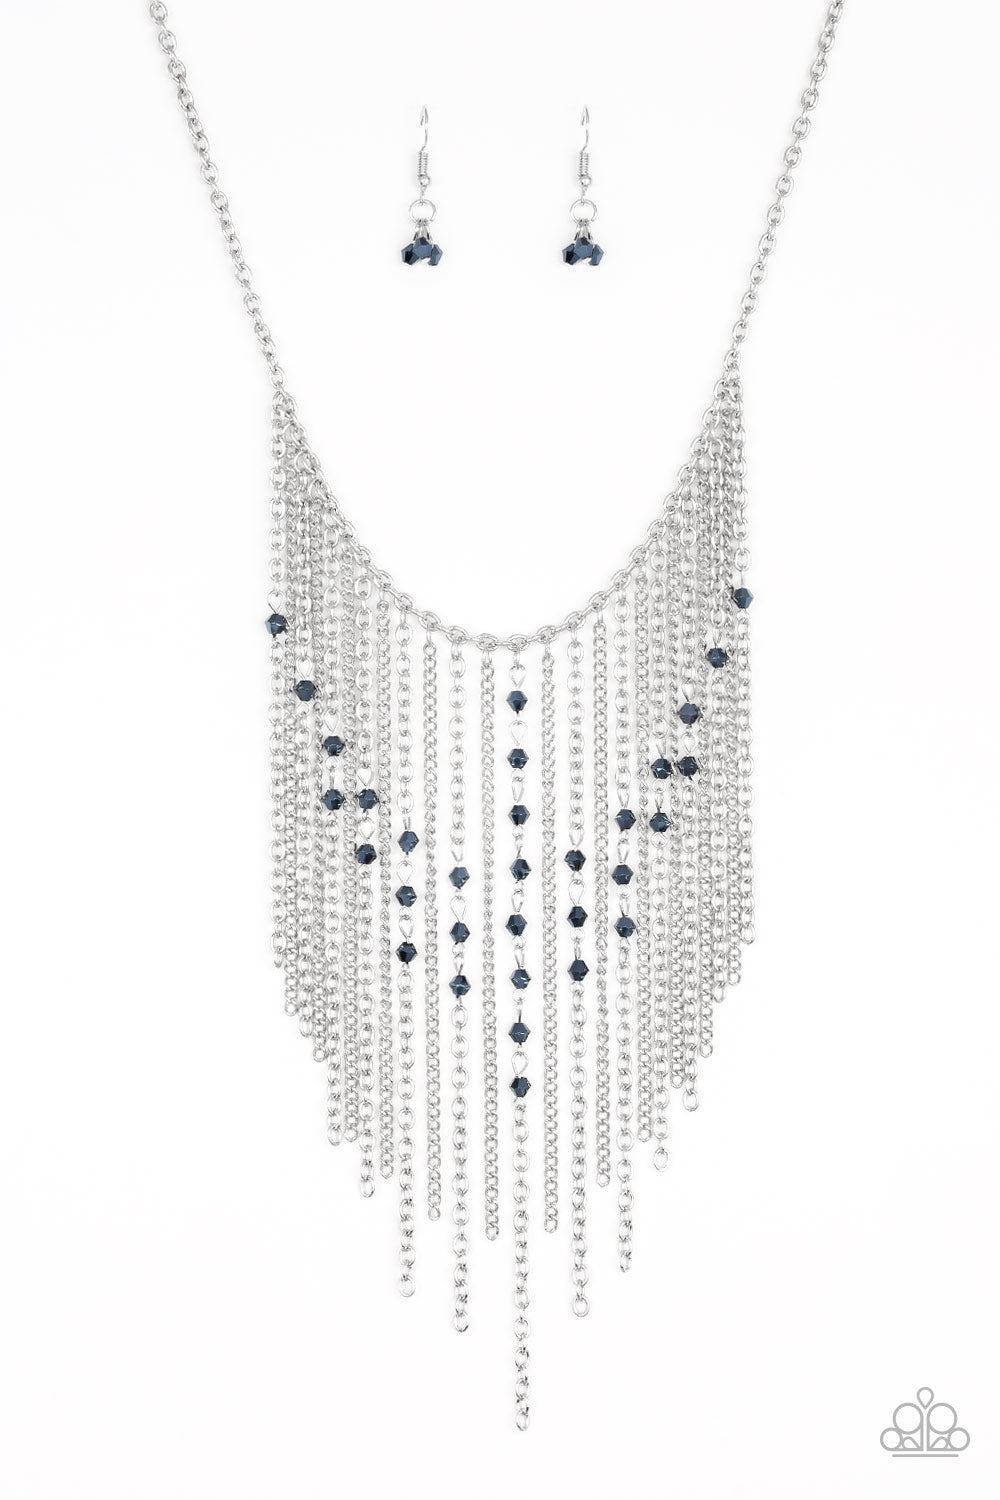 First Class Fringe Blue Paparazzi Necklace Cashmere Pink Jewels - Cashmere Pink Jewels & Accessories, Cashmere Pink Jewels & Accessories - Paparazzi